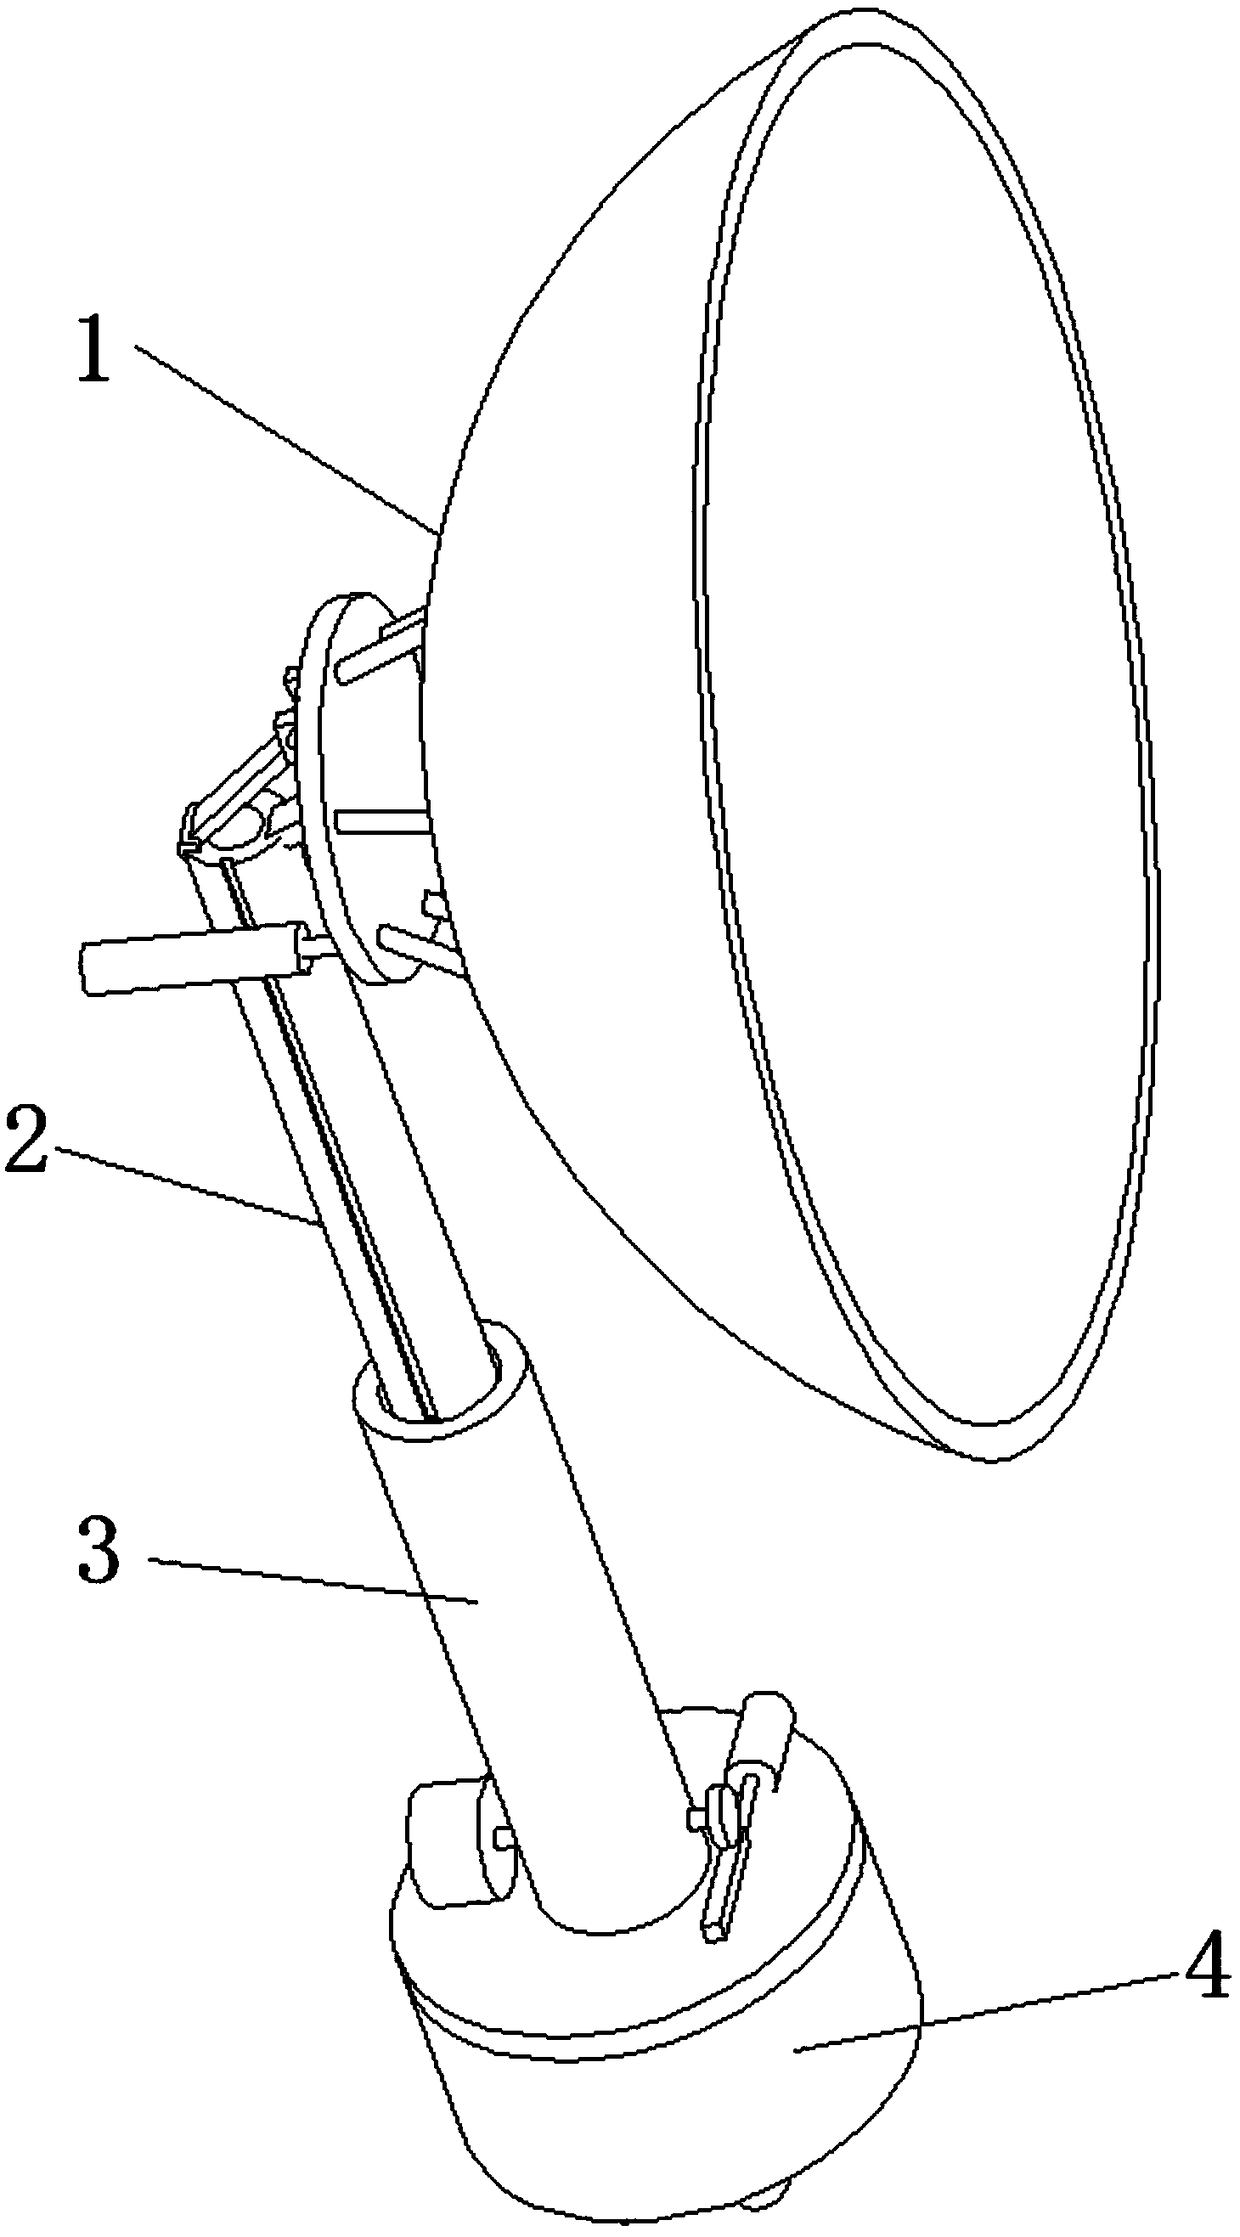 A household satellite communication antenna which is convenient to be adjusted